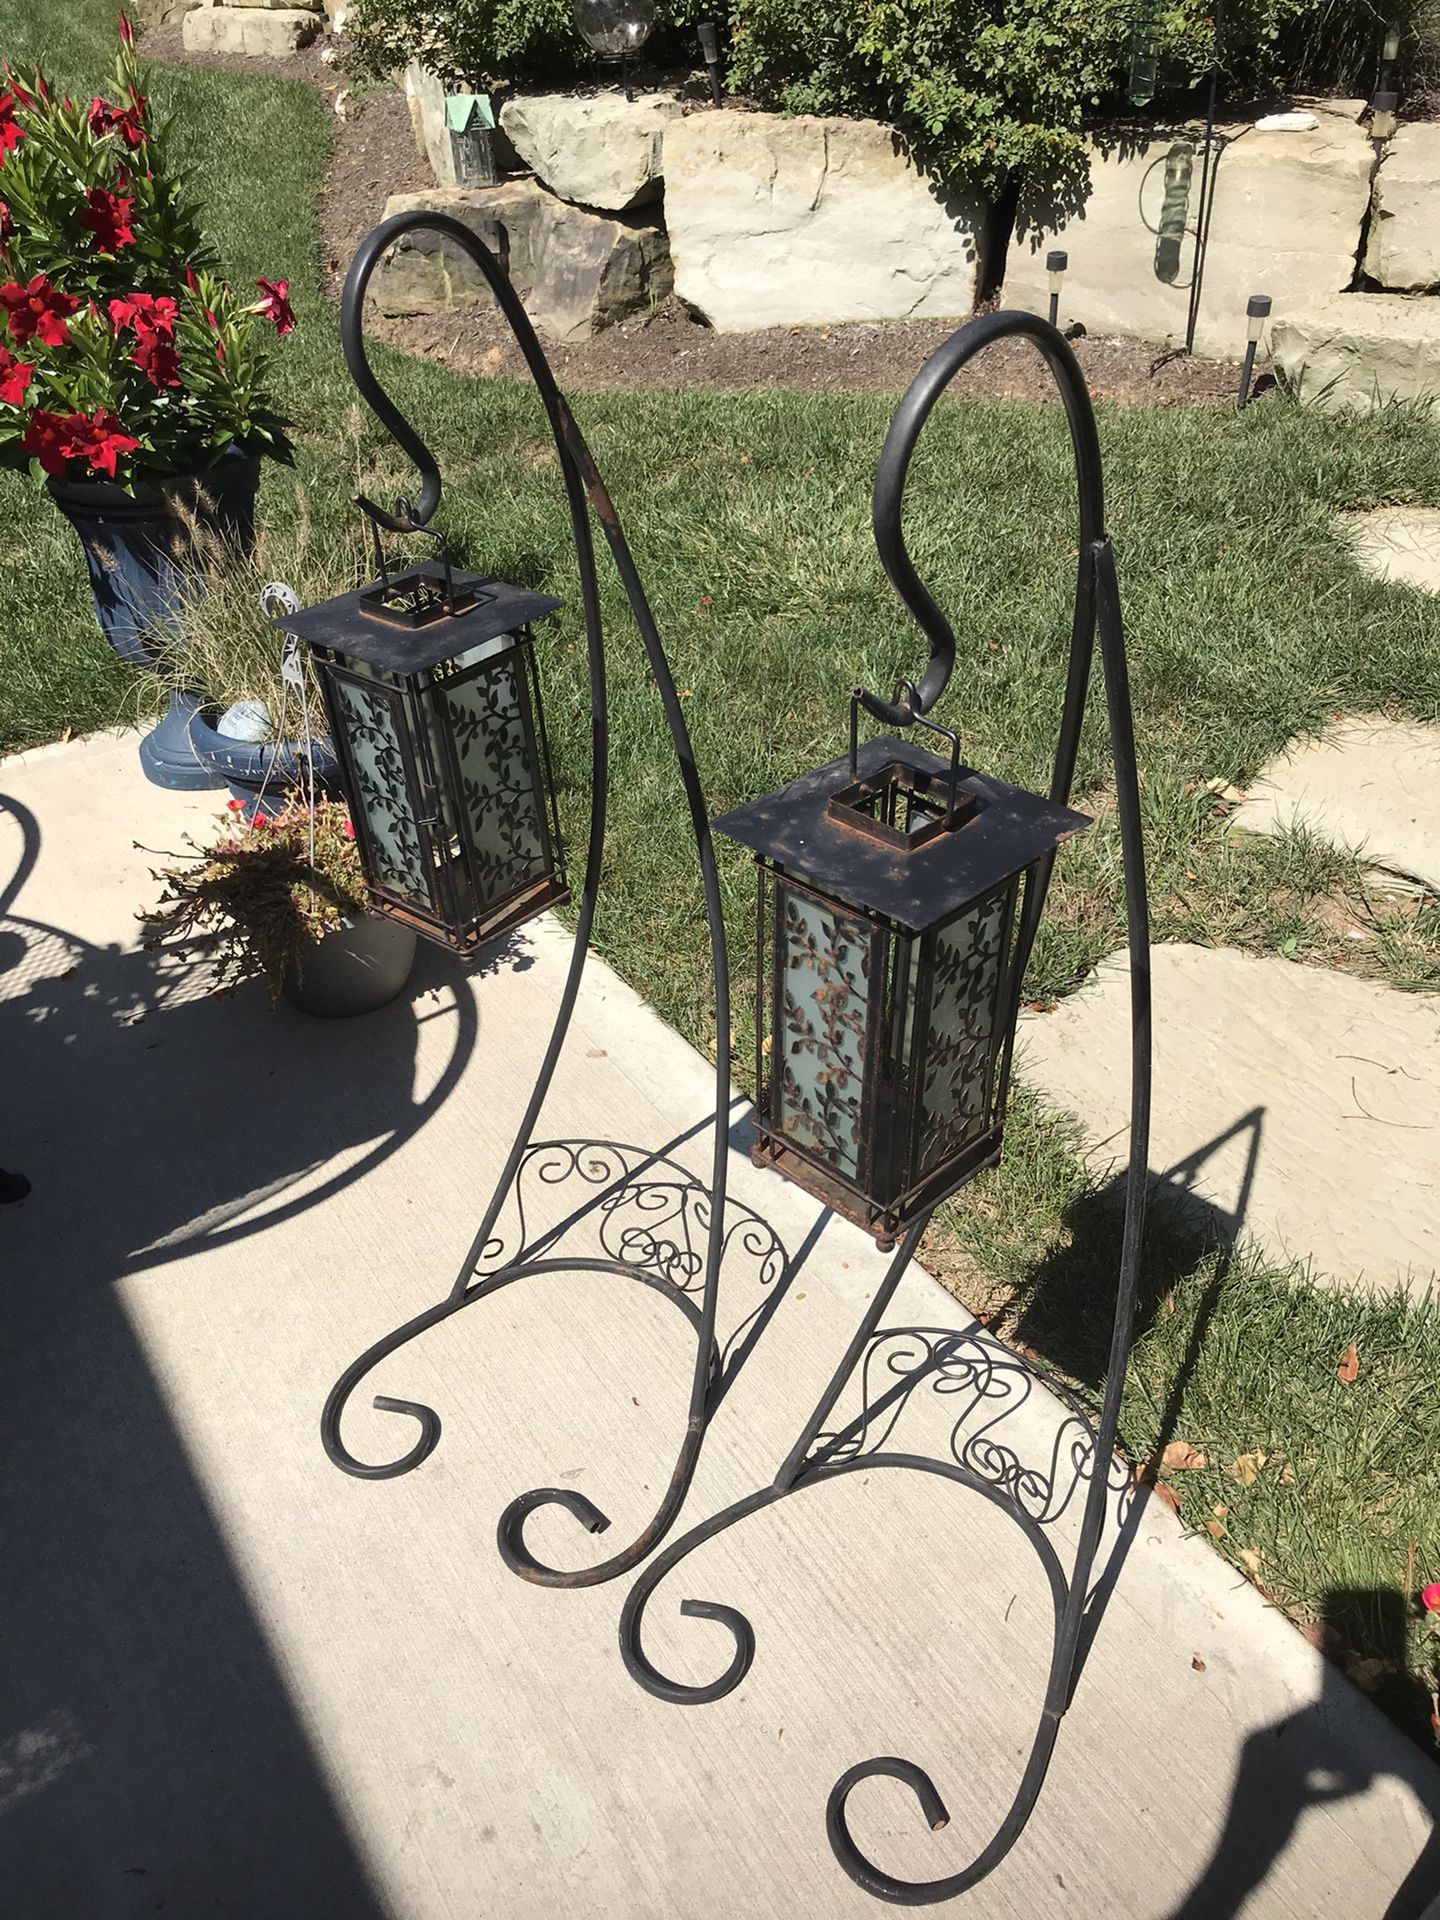 SET OF 2 - Iron Standing Plant/Birdhouse Hooks - perfectly balanced fanned base 40”Tx14” base. Lanterns and bird houses are also for sale separately.